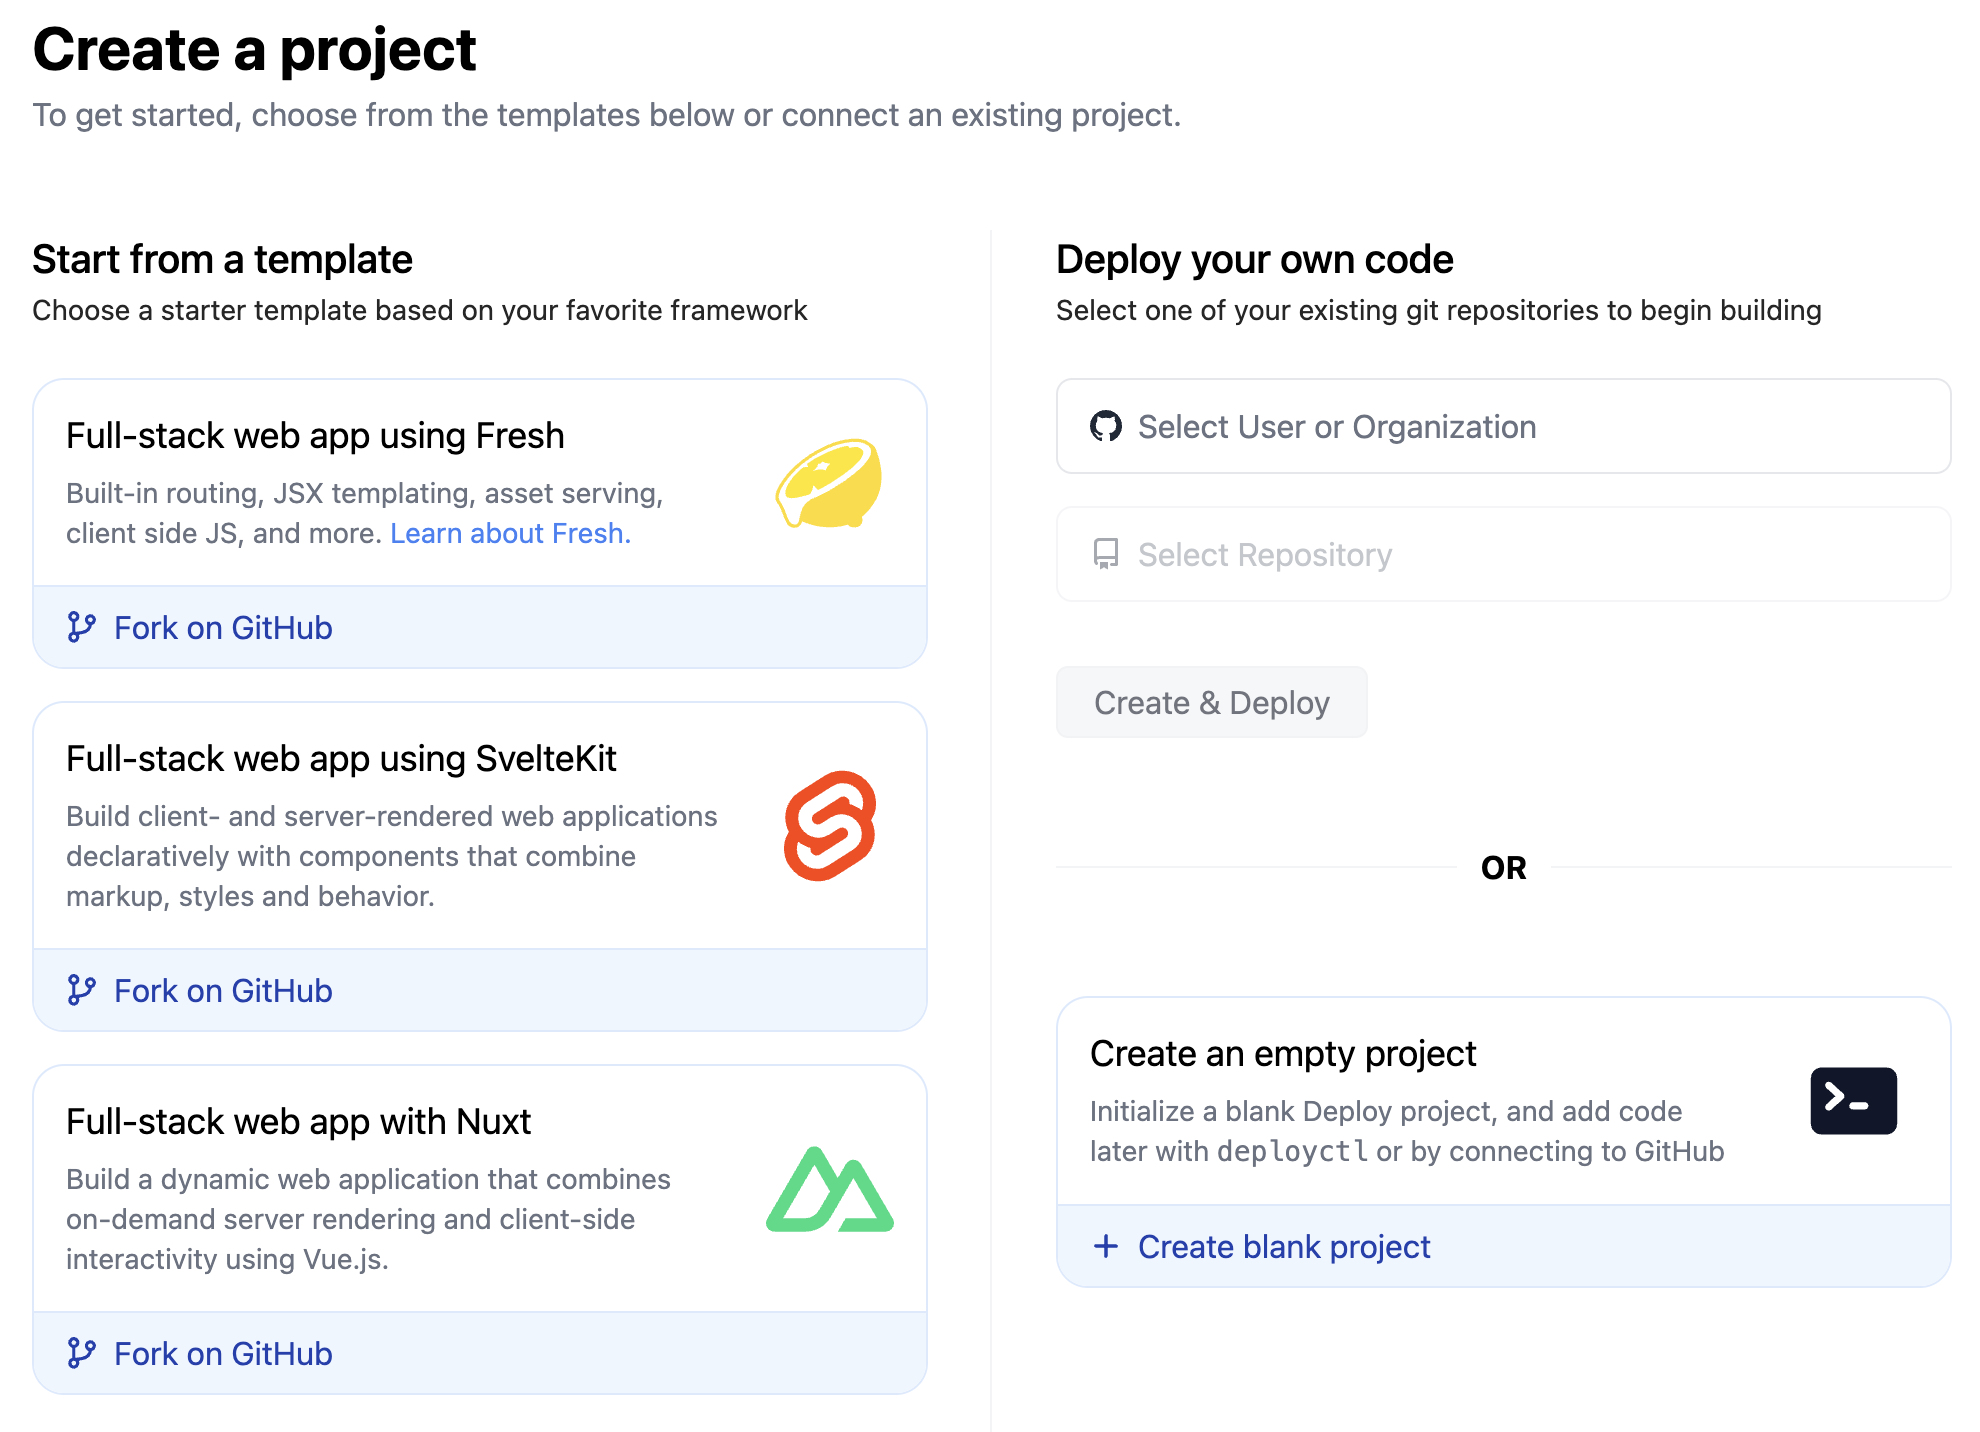 new project flow on Deploy